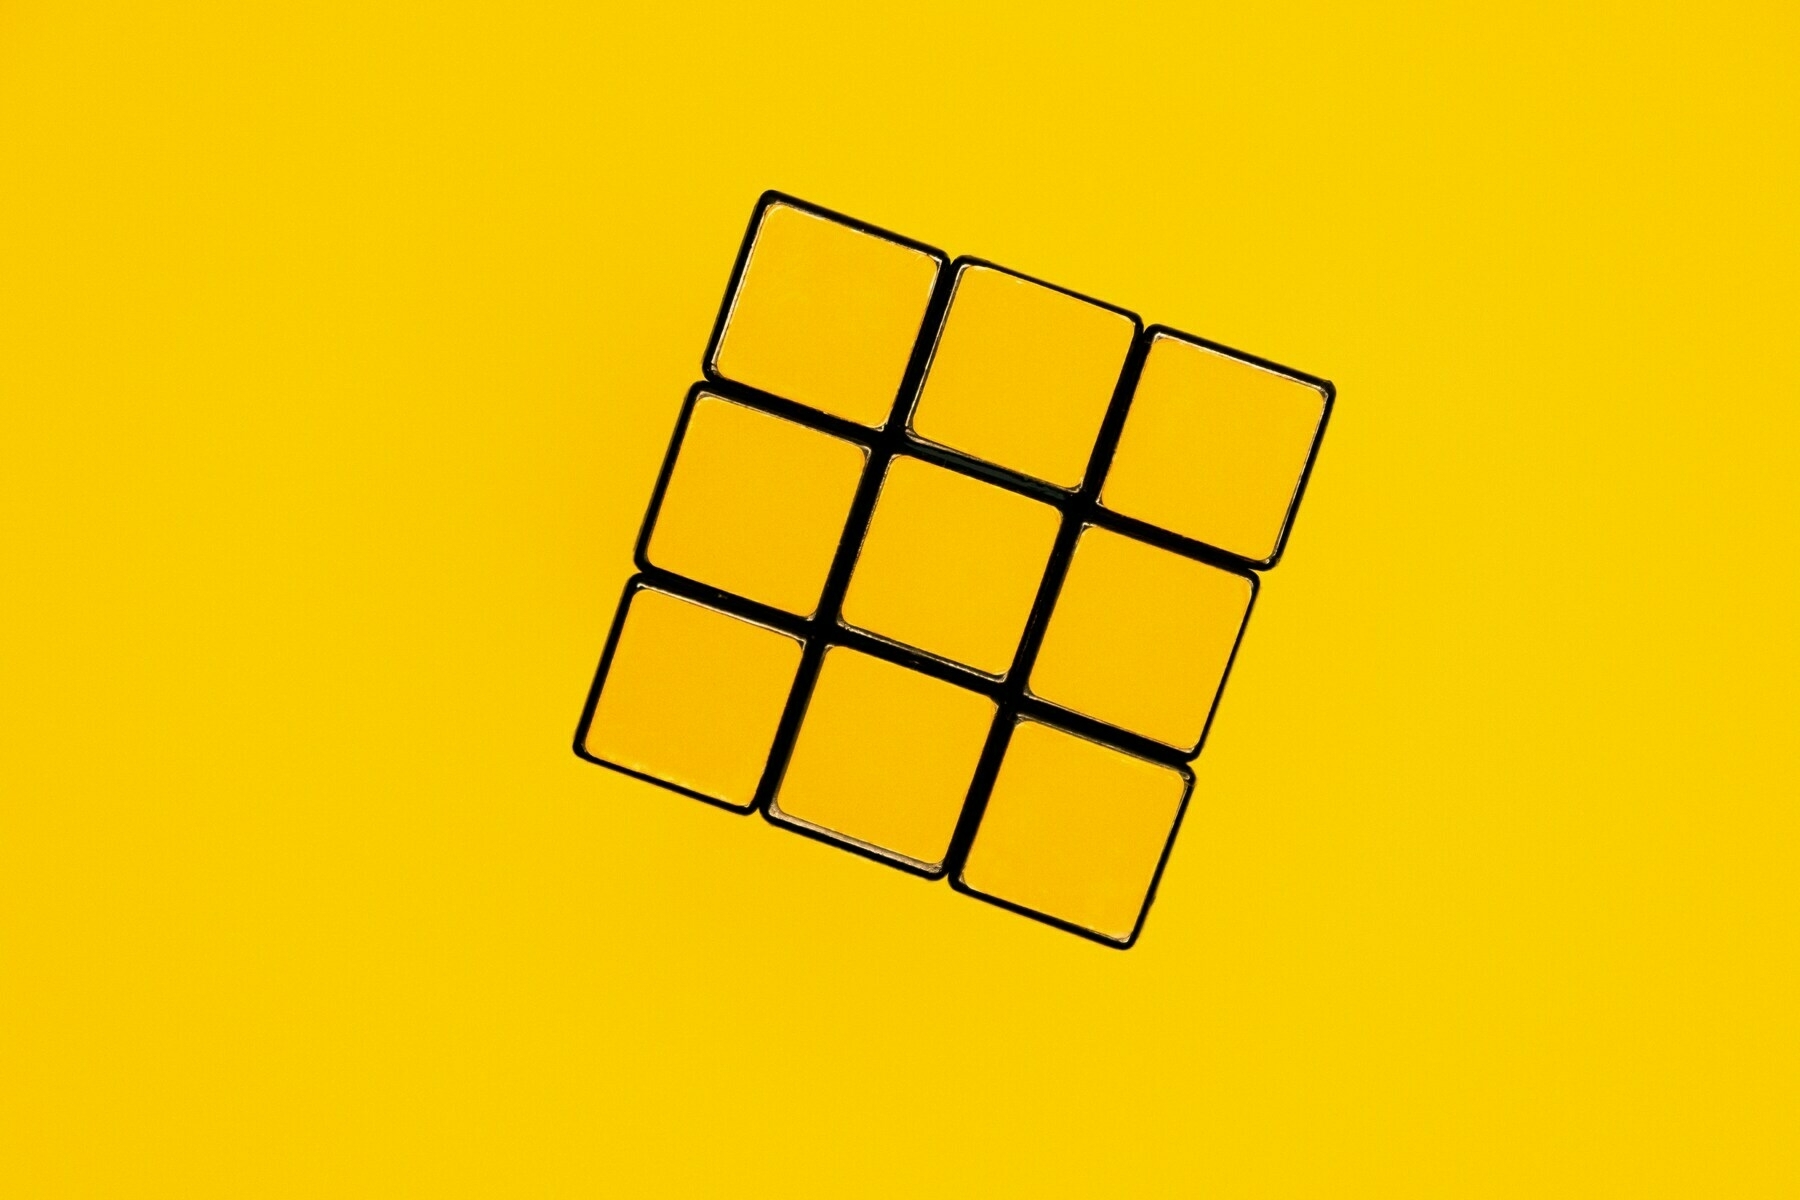 Yellow side of a solved Rubik's cube on a yellow background